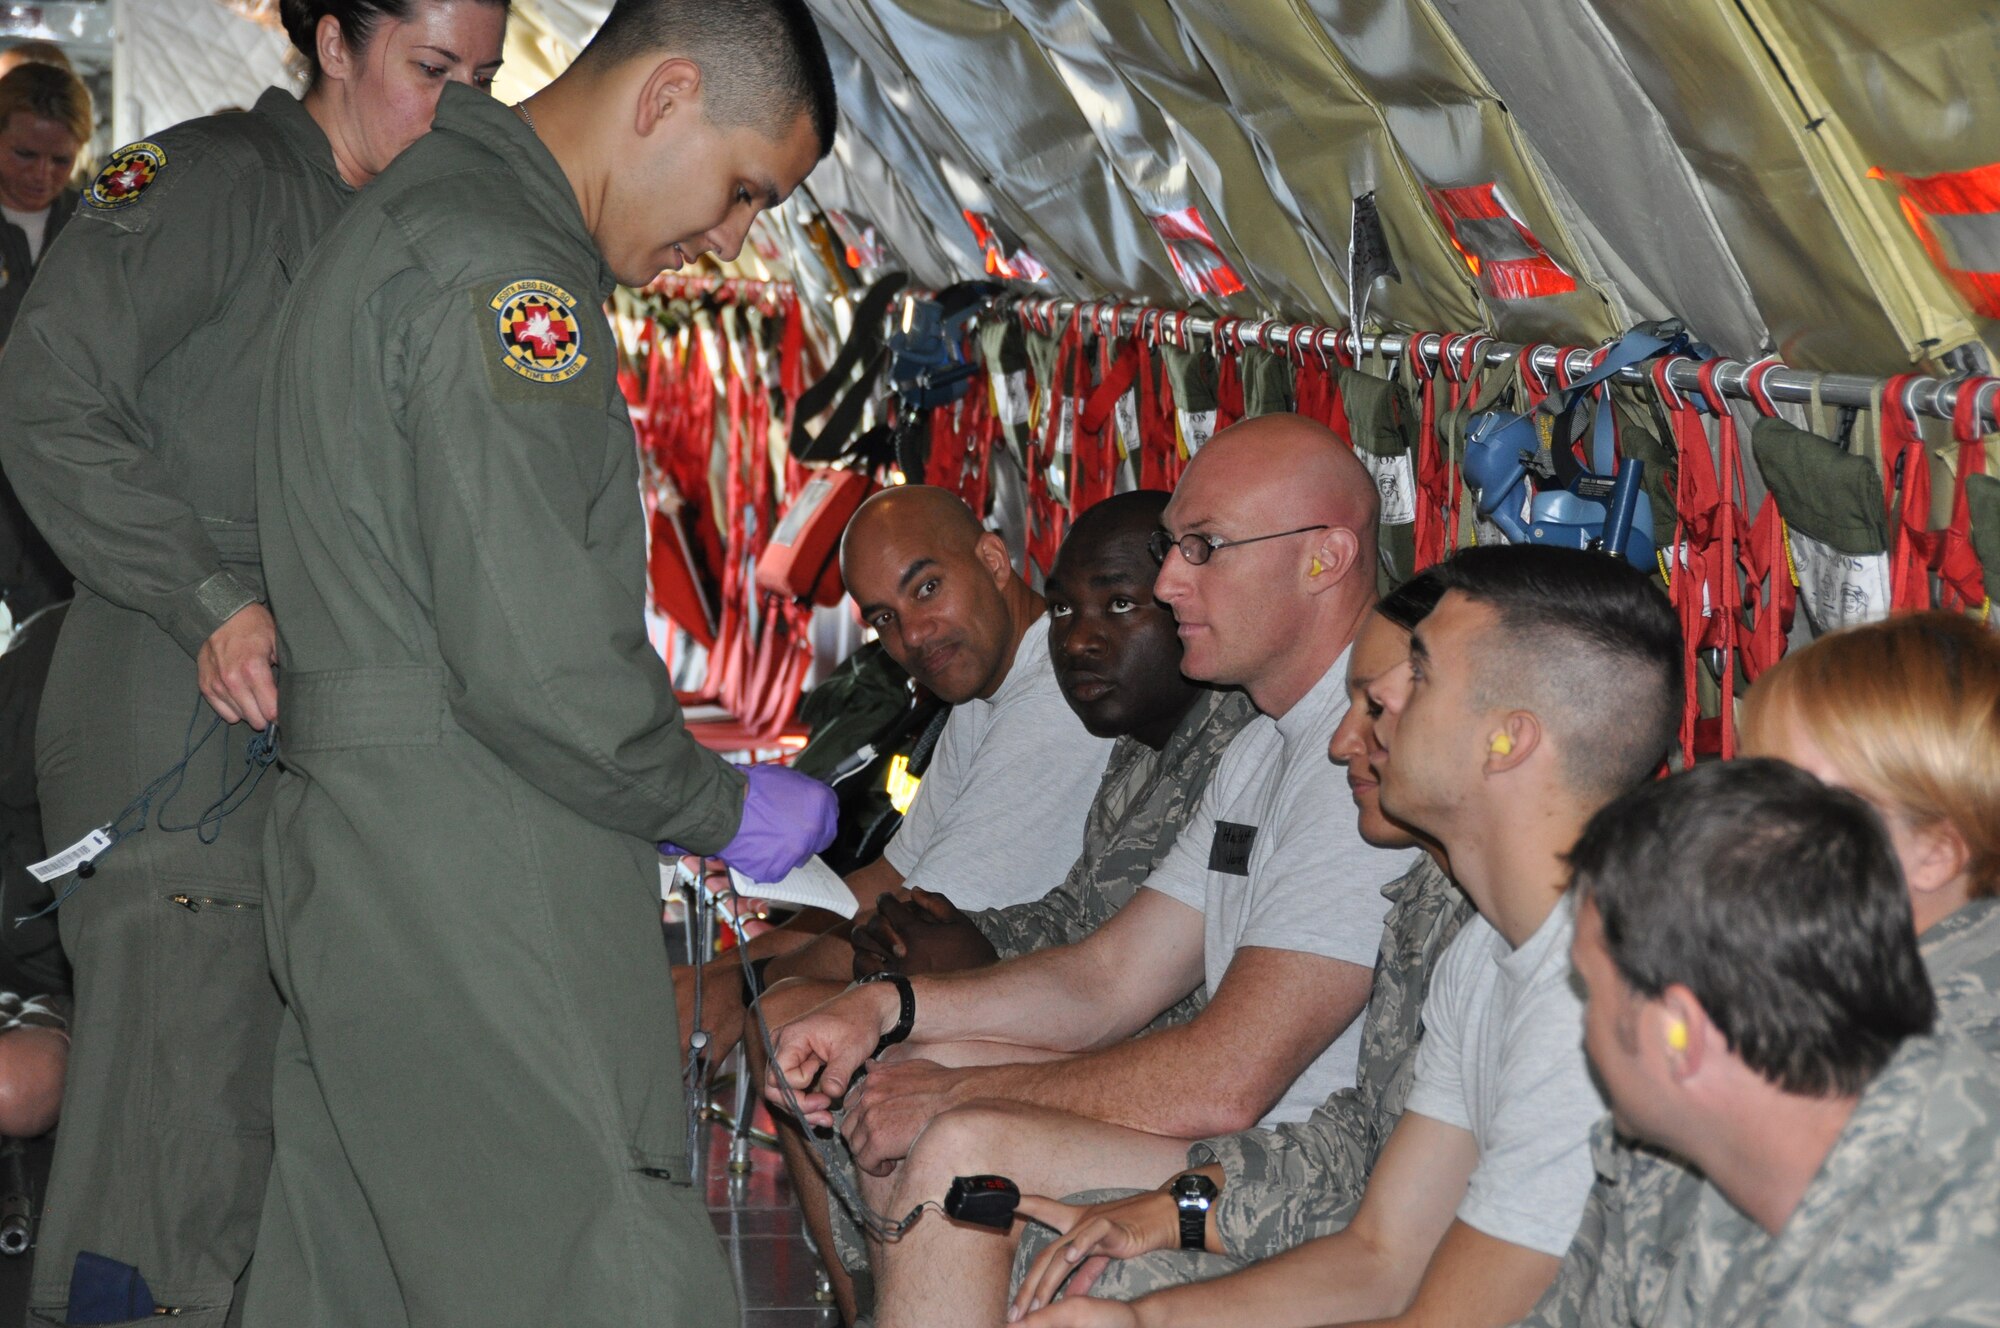 Members of the 459th Aeromedical Evacuation Squadron go over safety procedures and provide last minute medical care to patients before the aerial evacuation takes place. The exercise mimicked emergency medical situation in the event of a disaster at Joint Base Andrews on Monday, May 4, 2015 (Air Force Photo / Senior Airman Kristin Kurtz)